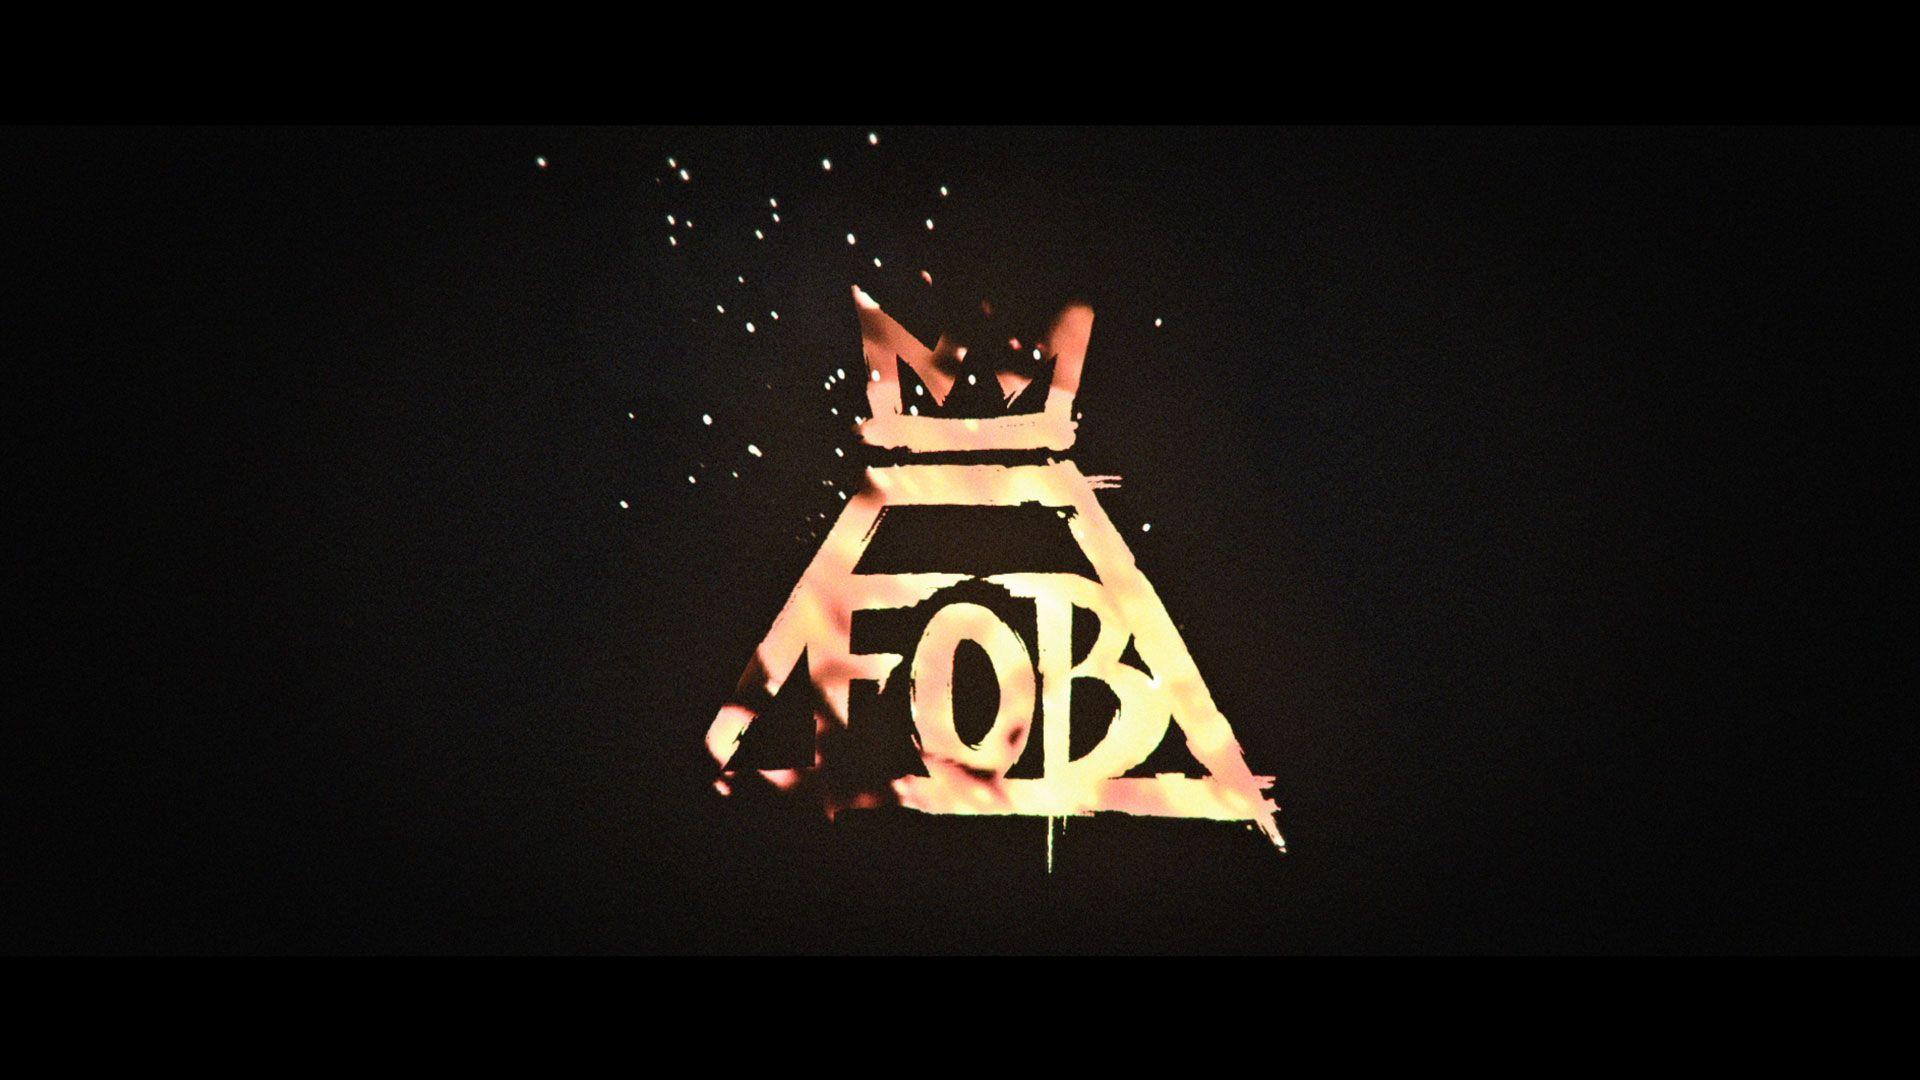 Fall out boy logo wallpapers